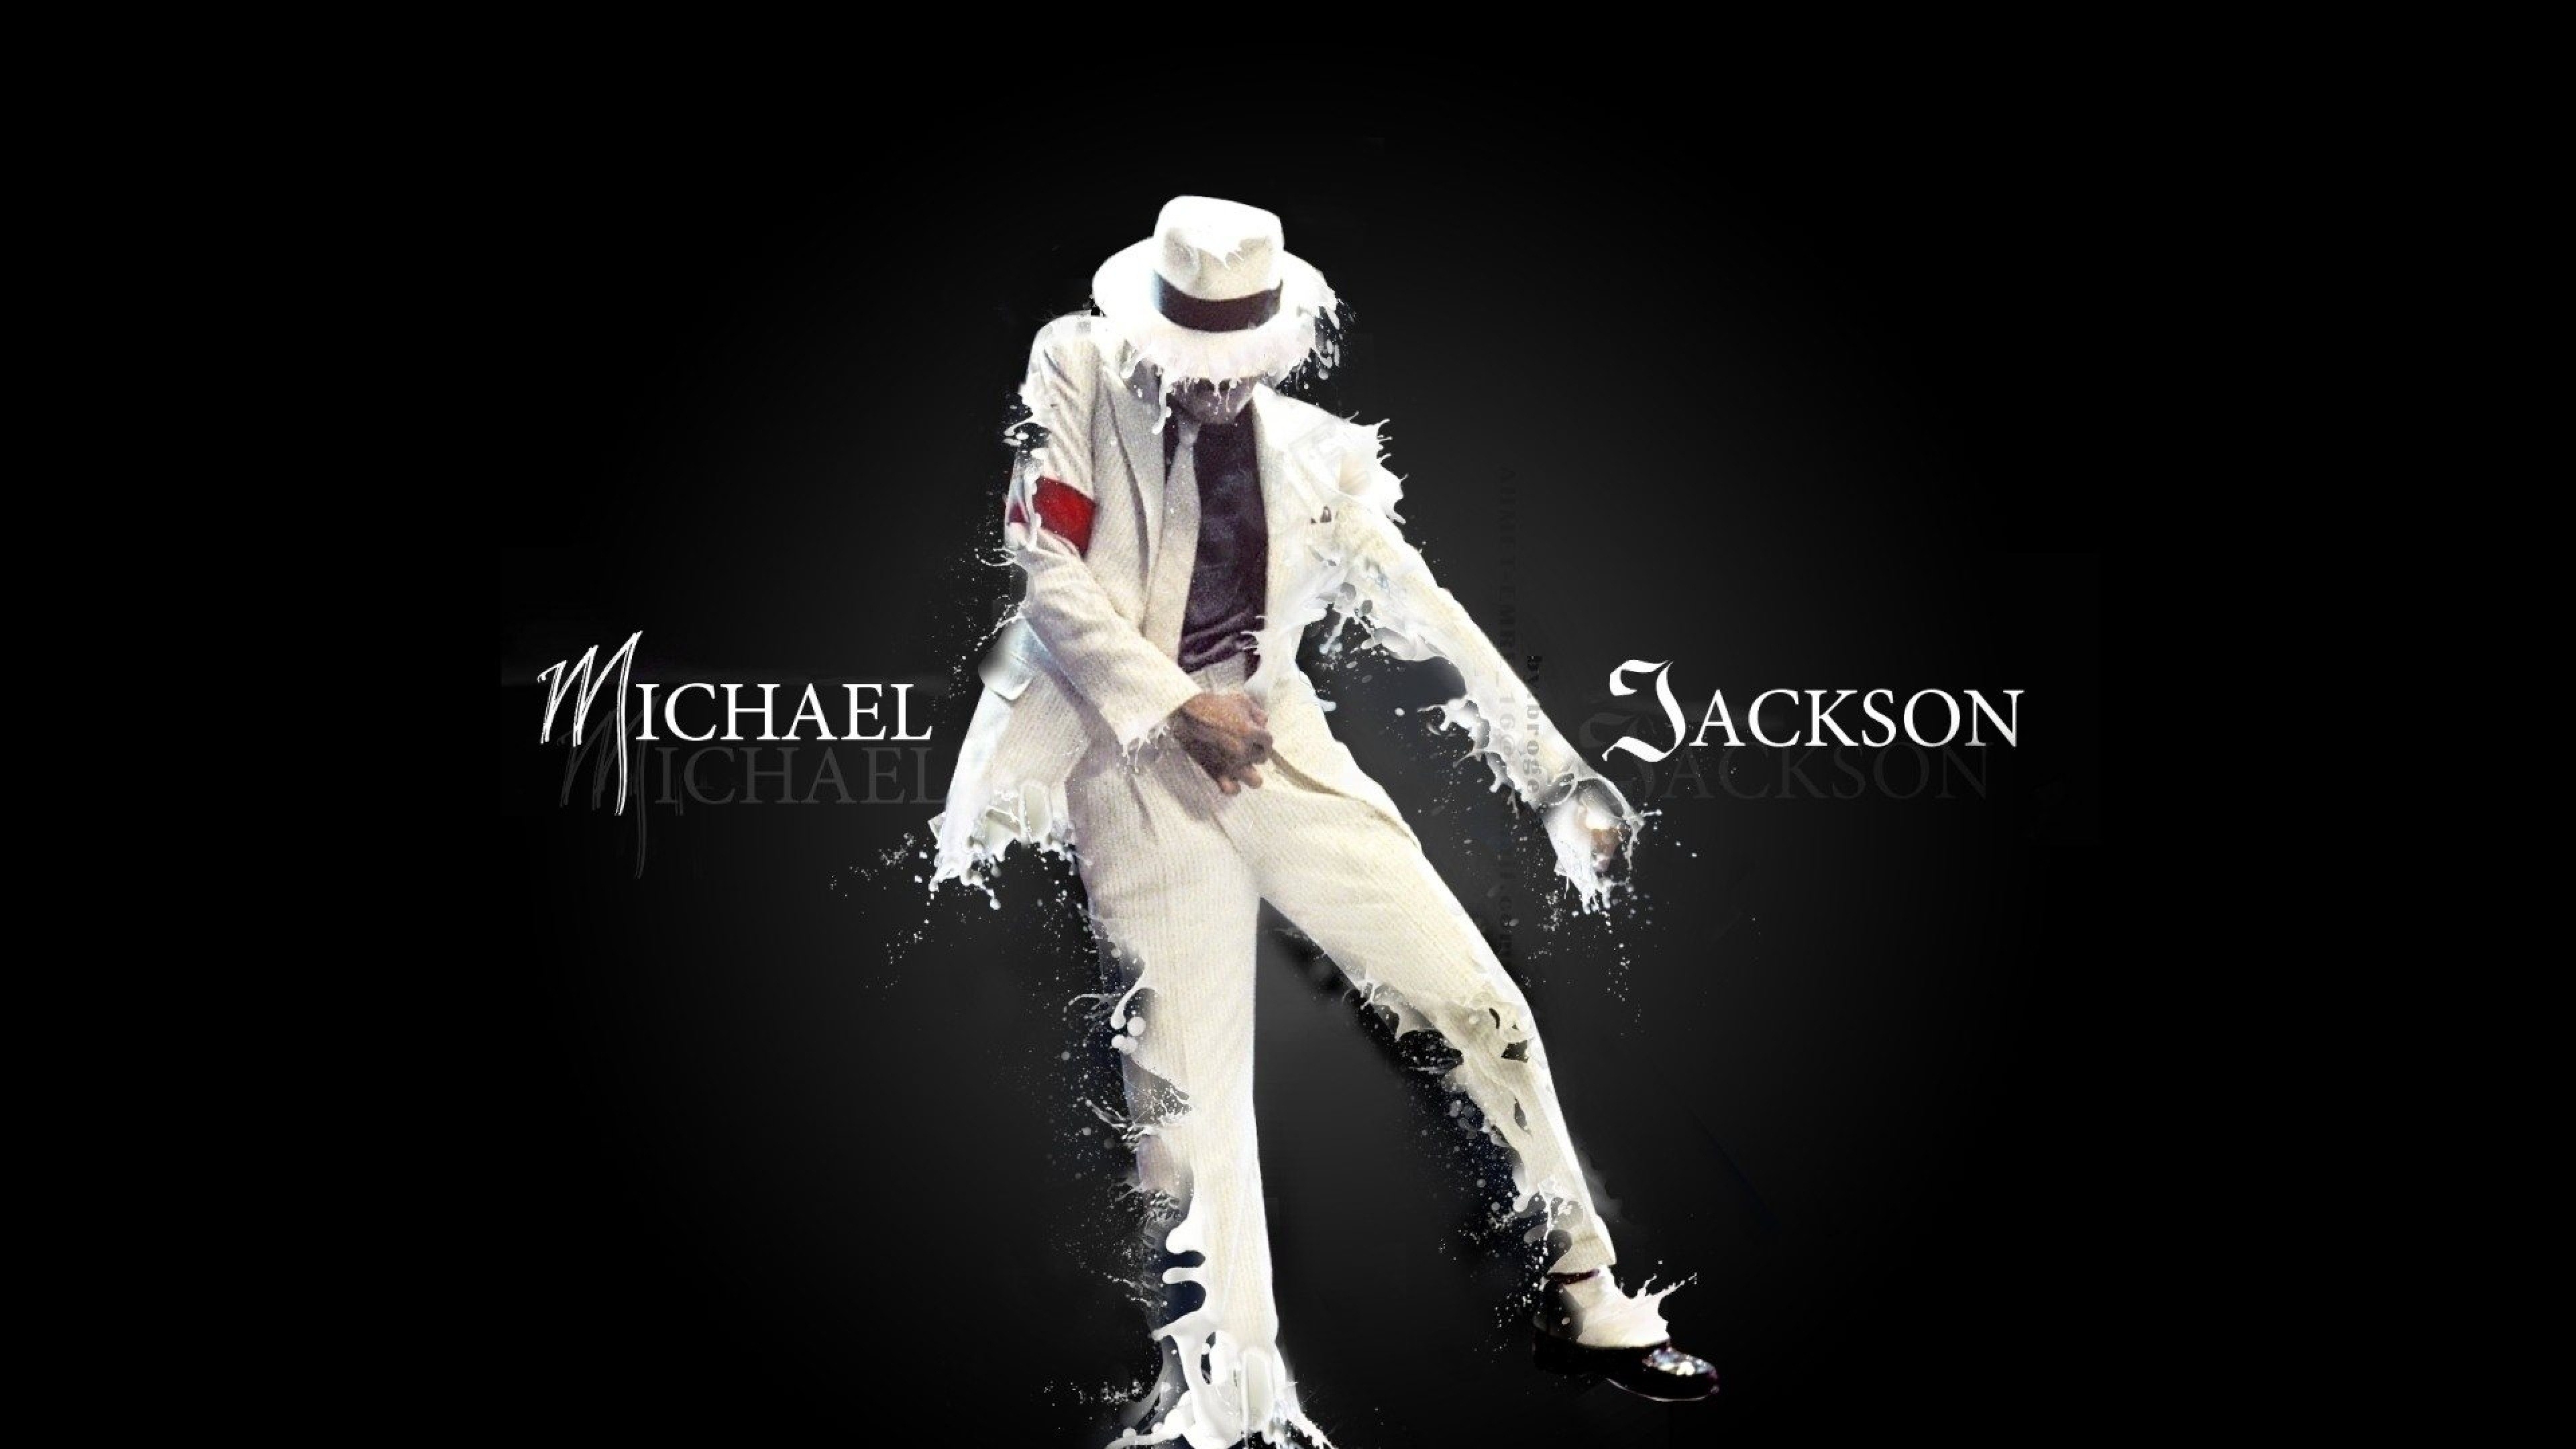 Moonwalk Dance: King of Pop, A global figure in popular culture, The most awarded individual music artist in history. 3840x2160 4K Wallpaper.